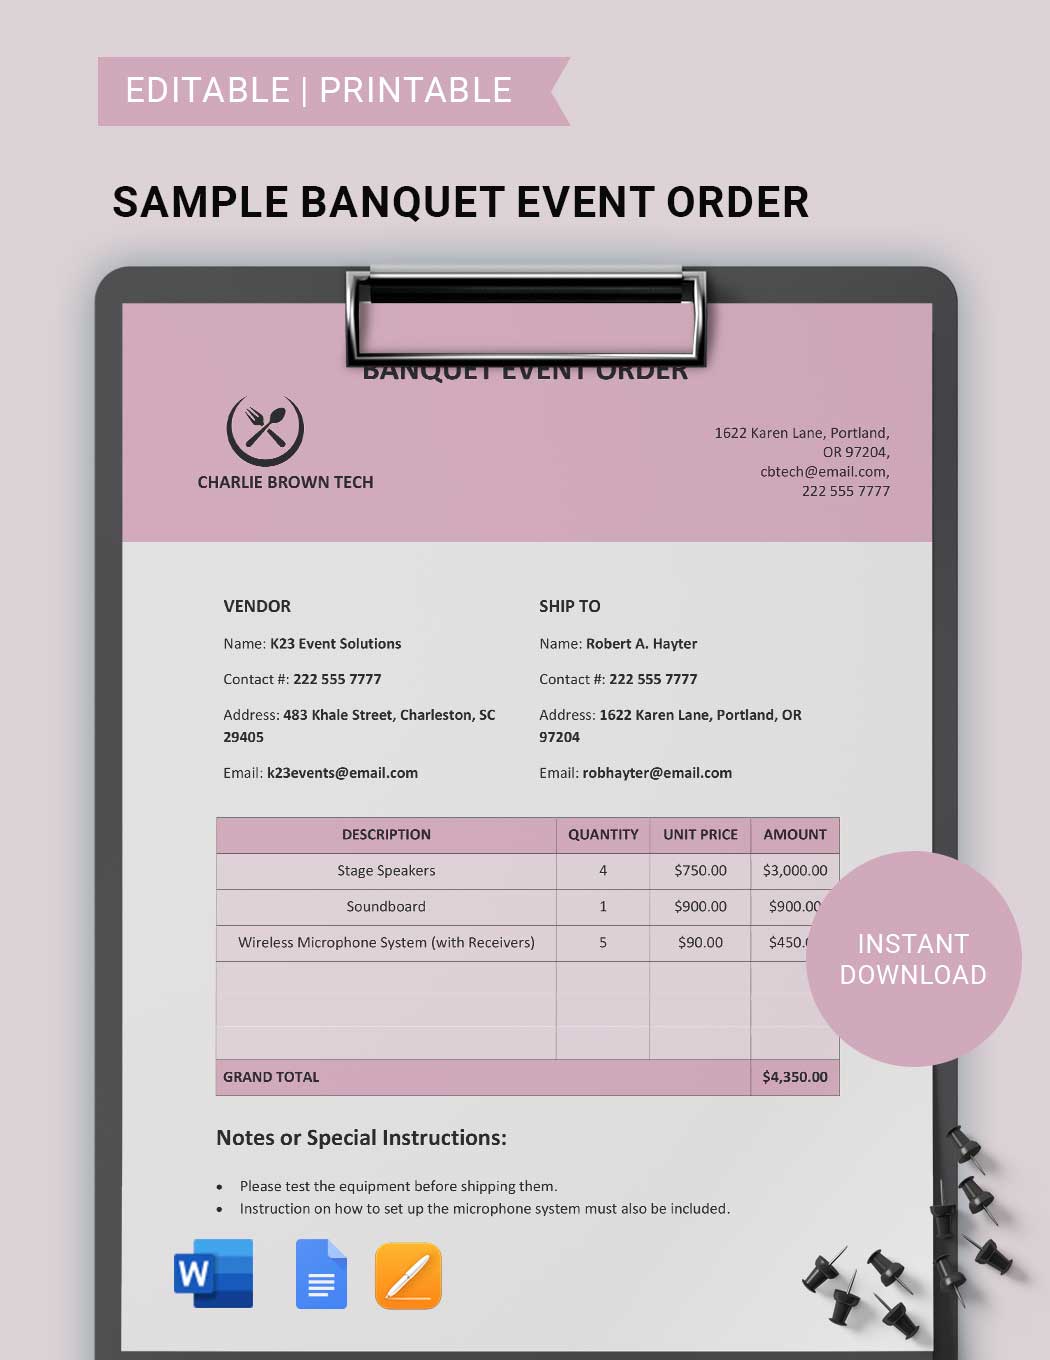 FREE Banquet Event Order (BEO) Template Download in Word, Google Docs